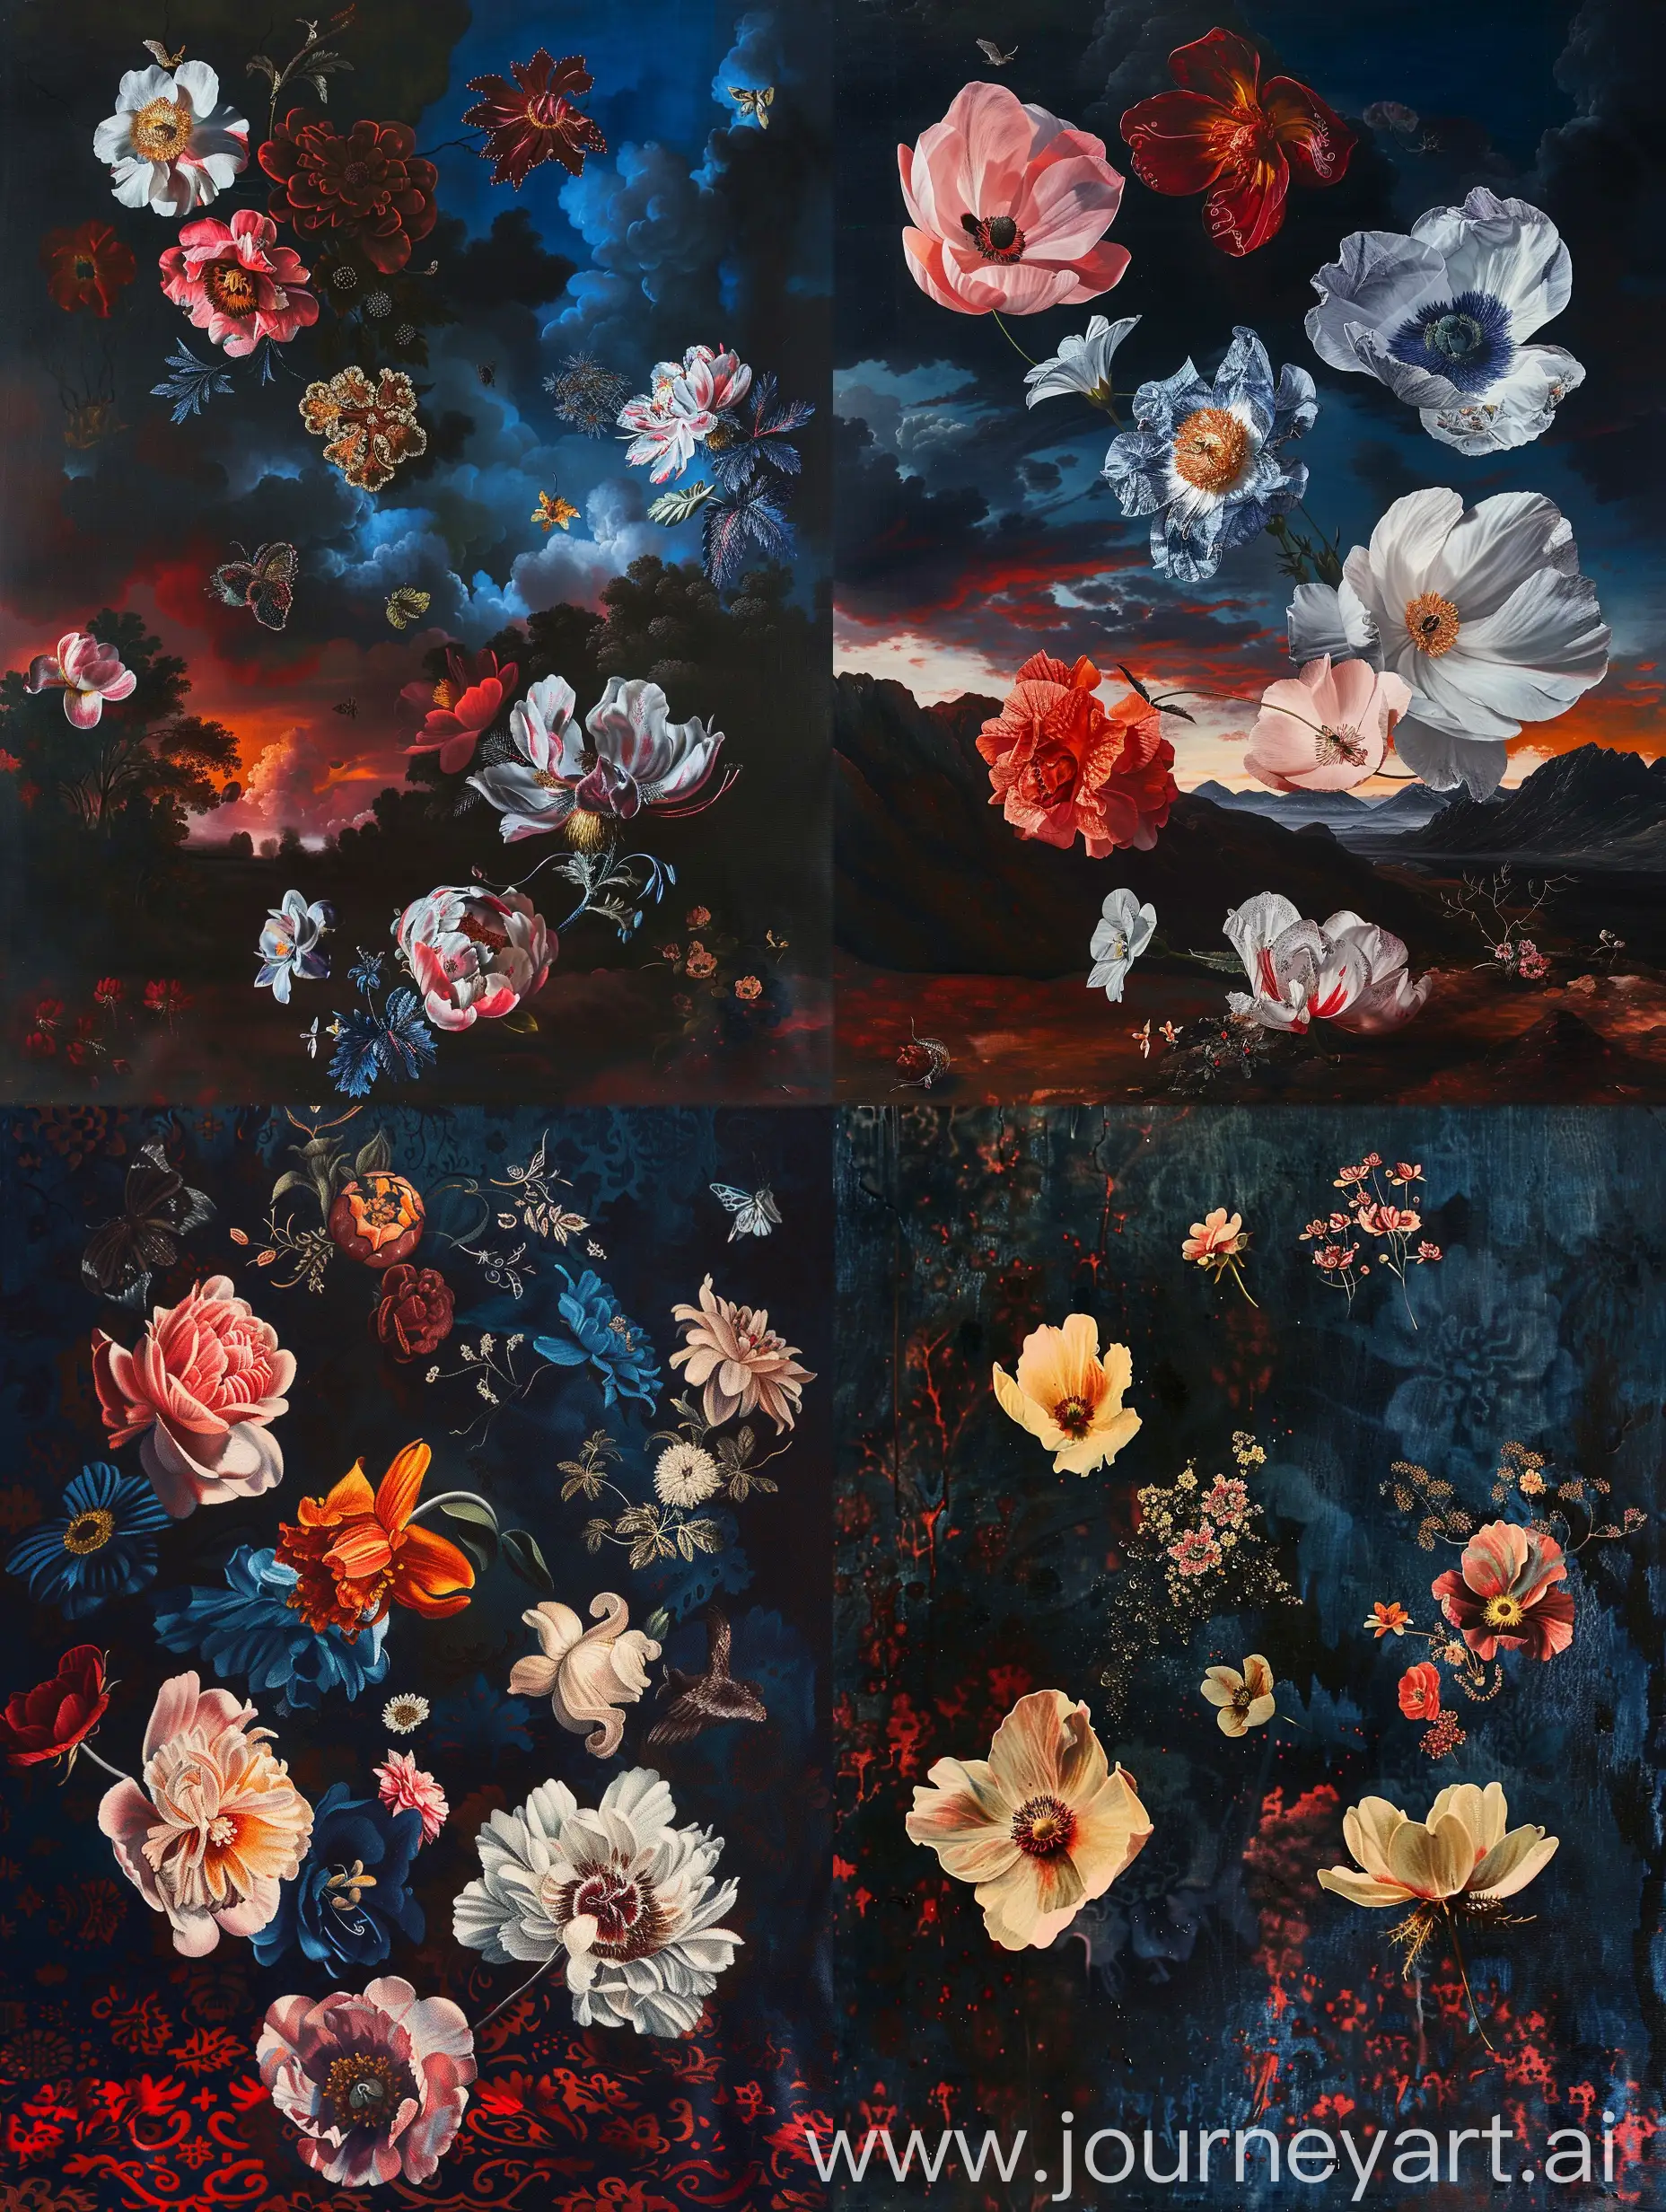 BaroqueInspired-Floral-Symphony-Exquisite-Embroidered-Blooms-in-Chiaroscuro-Elegance